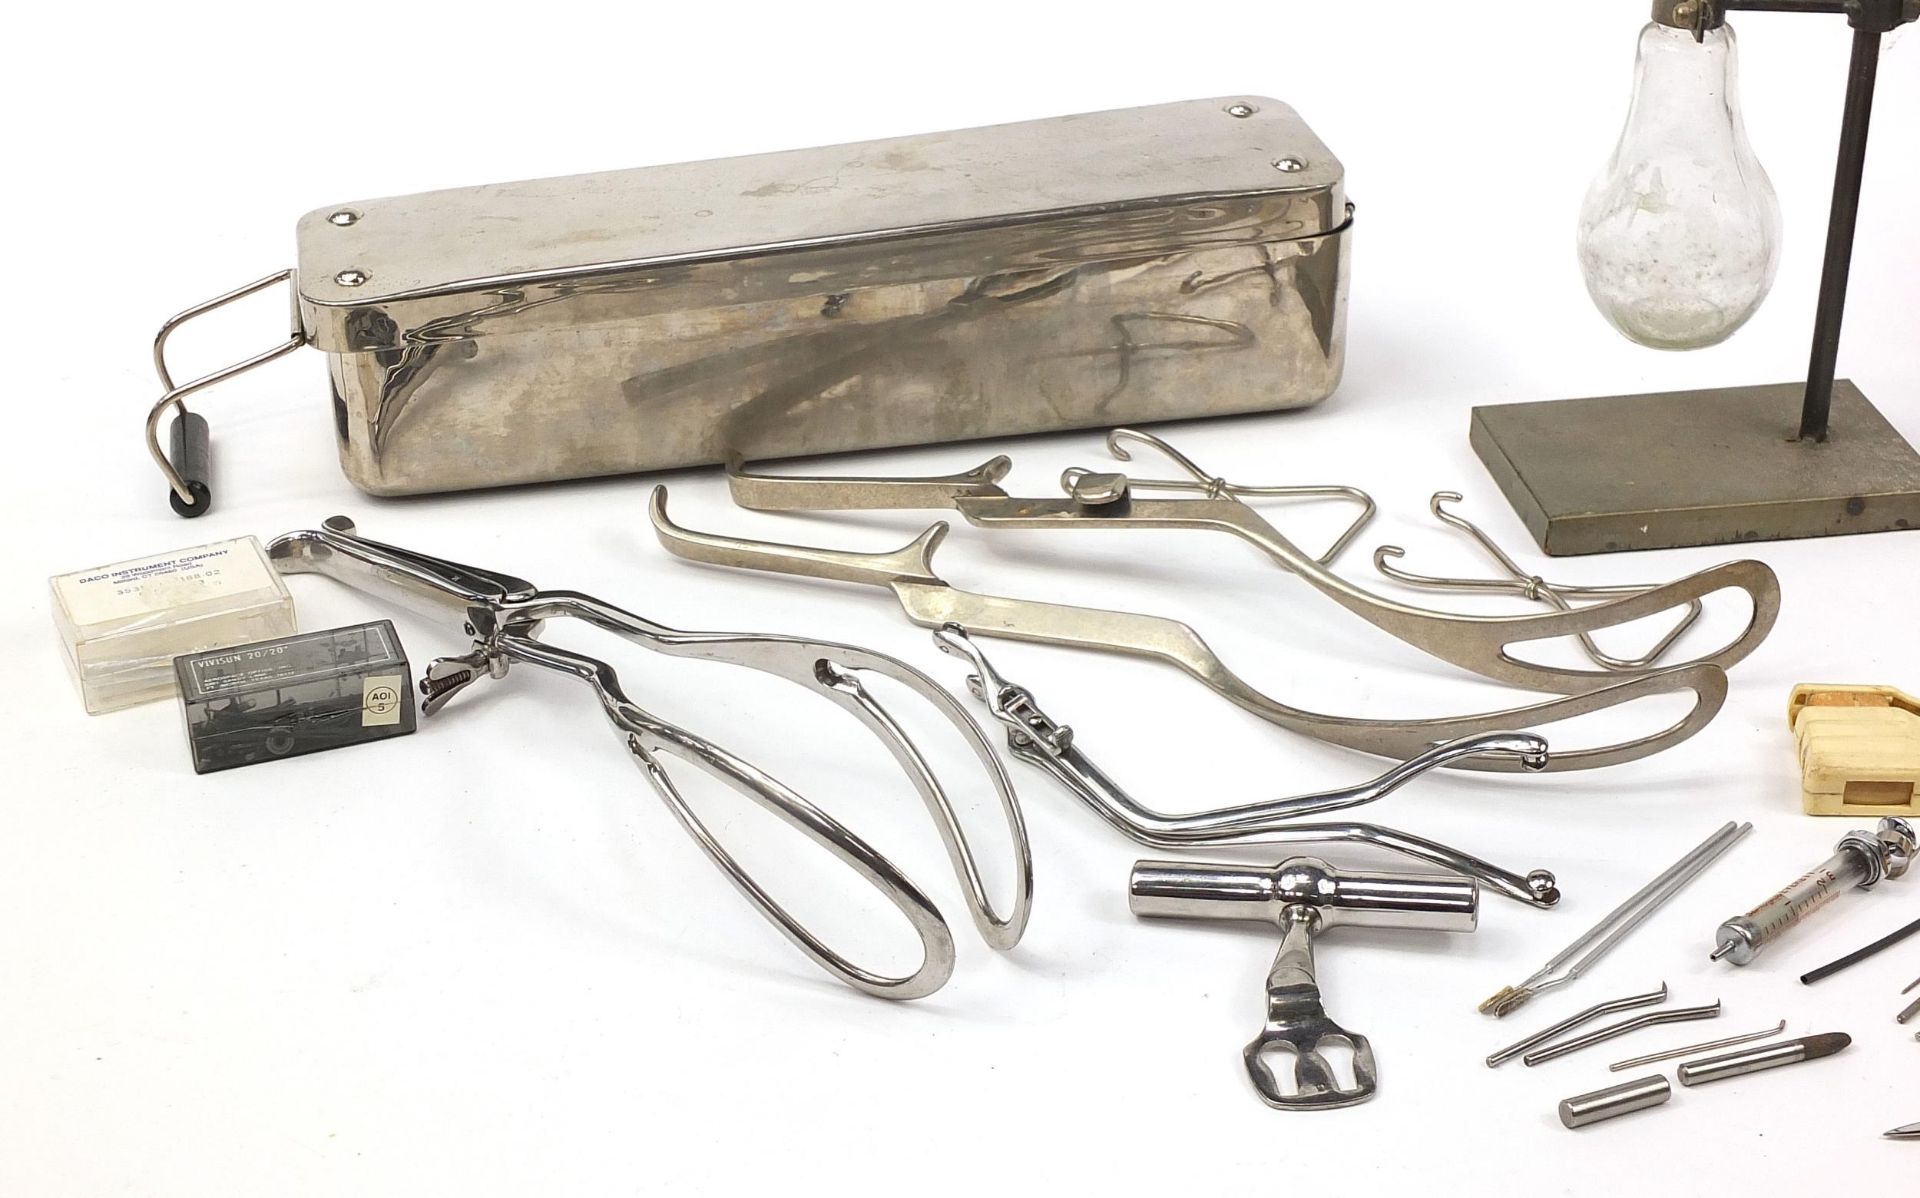 Sundry items including Kodak plate camera and vintage G F Thackray medical instruments - Image 2 of 4